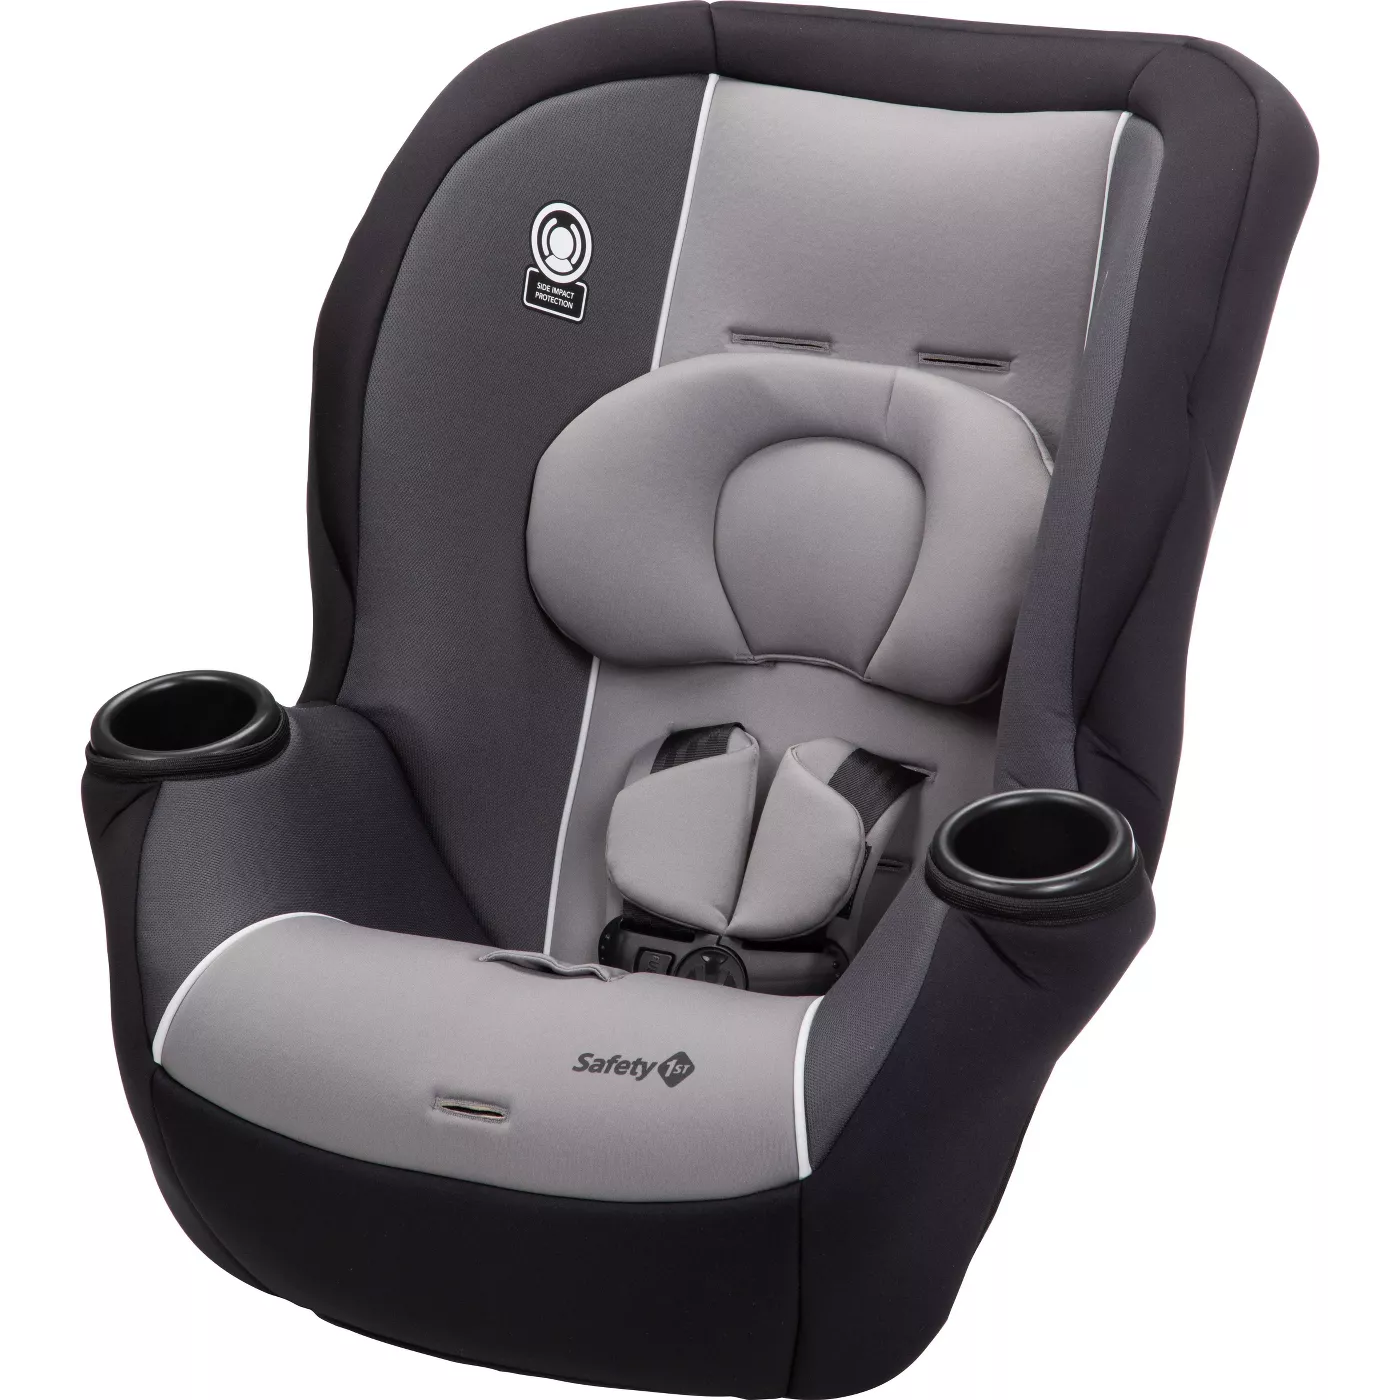 Safety 1st Easy Grow Convertible Car Seat ONLY $55.99 (Reg $75)